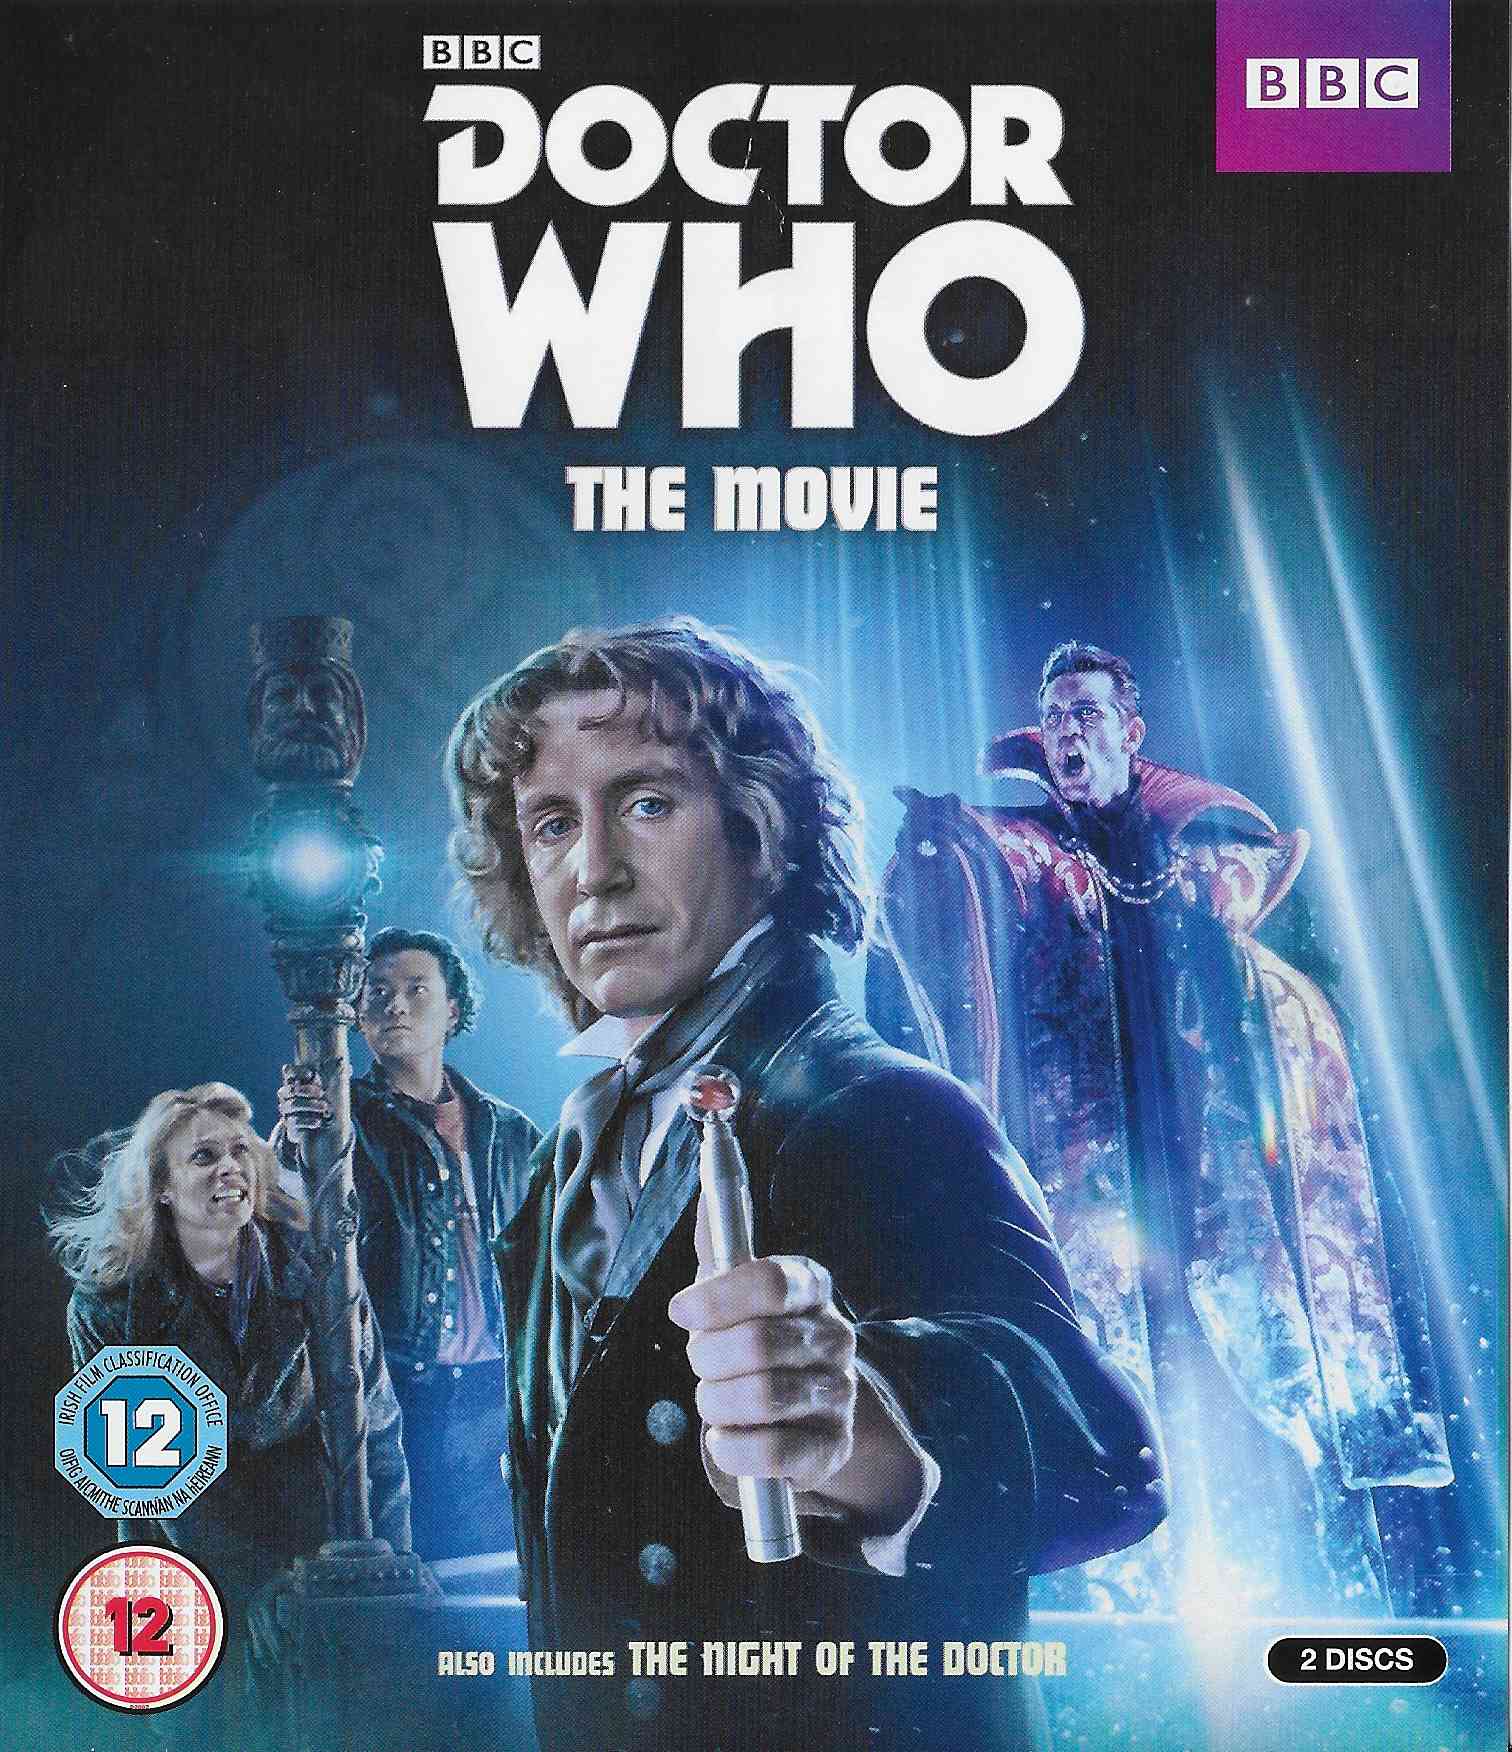 Picture of BBCBD 0374 Doctor Who - The movie by artist Matthew Jacobs from the BBC records and Tapes library